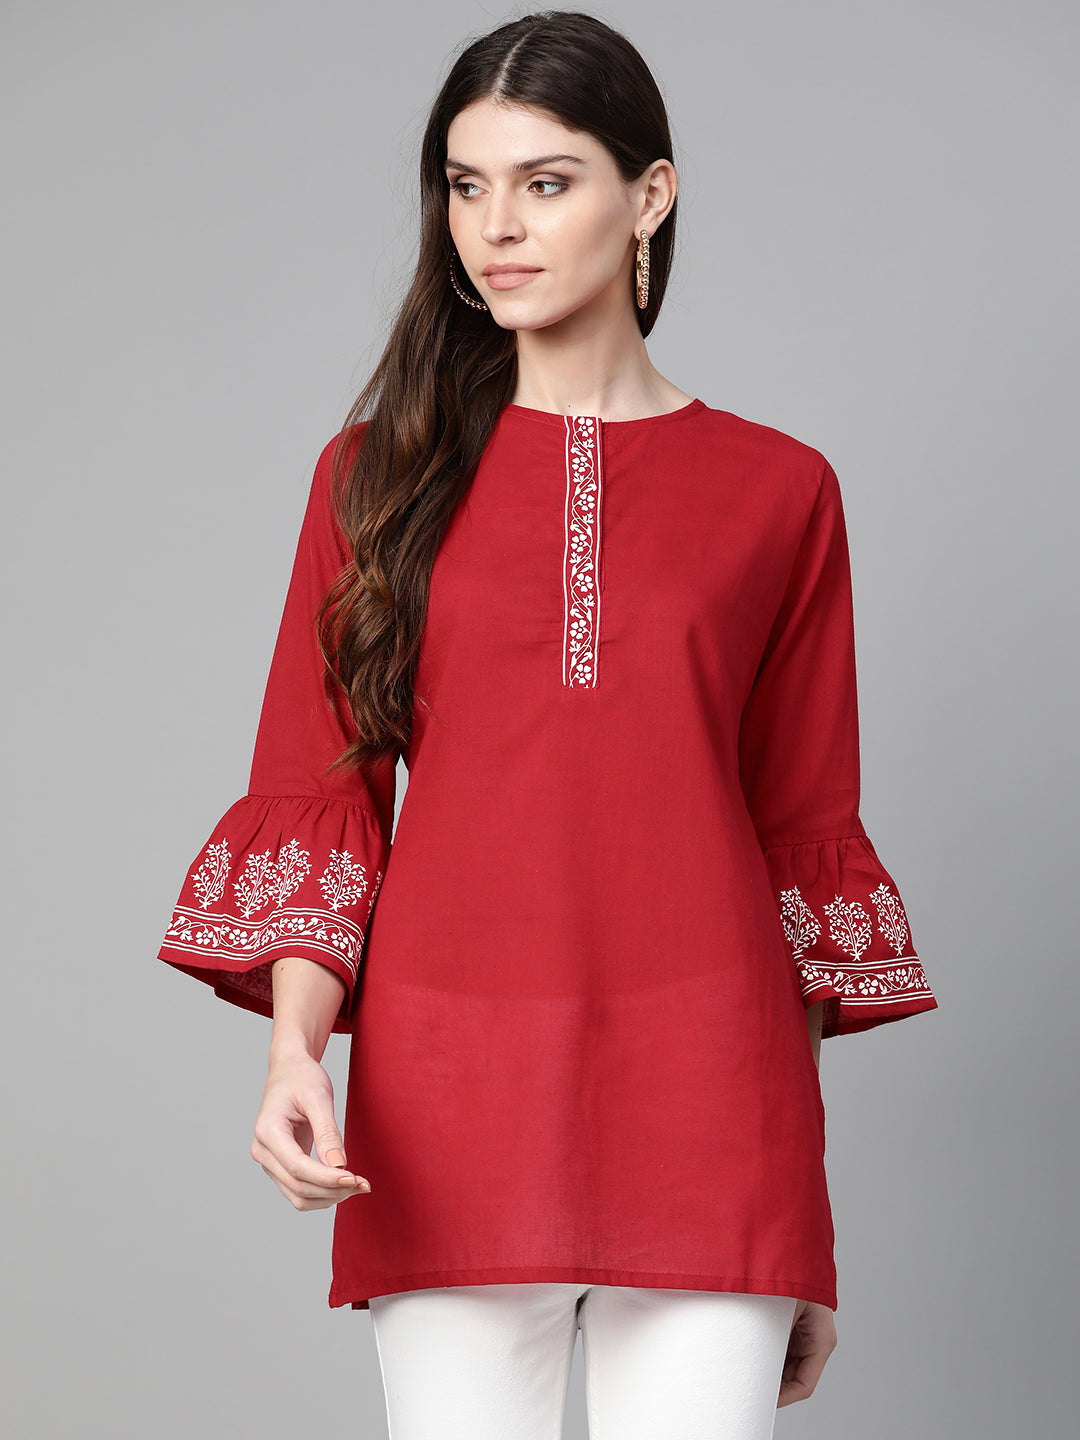 Bhama Couture Straight Maroon Bell Sleeved Tunic